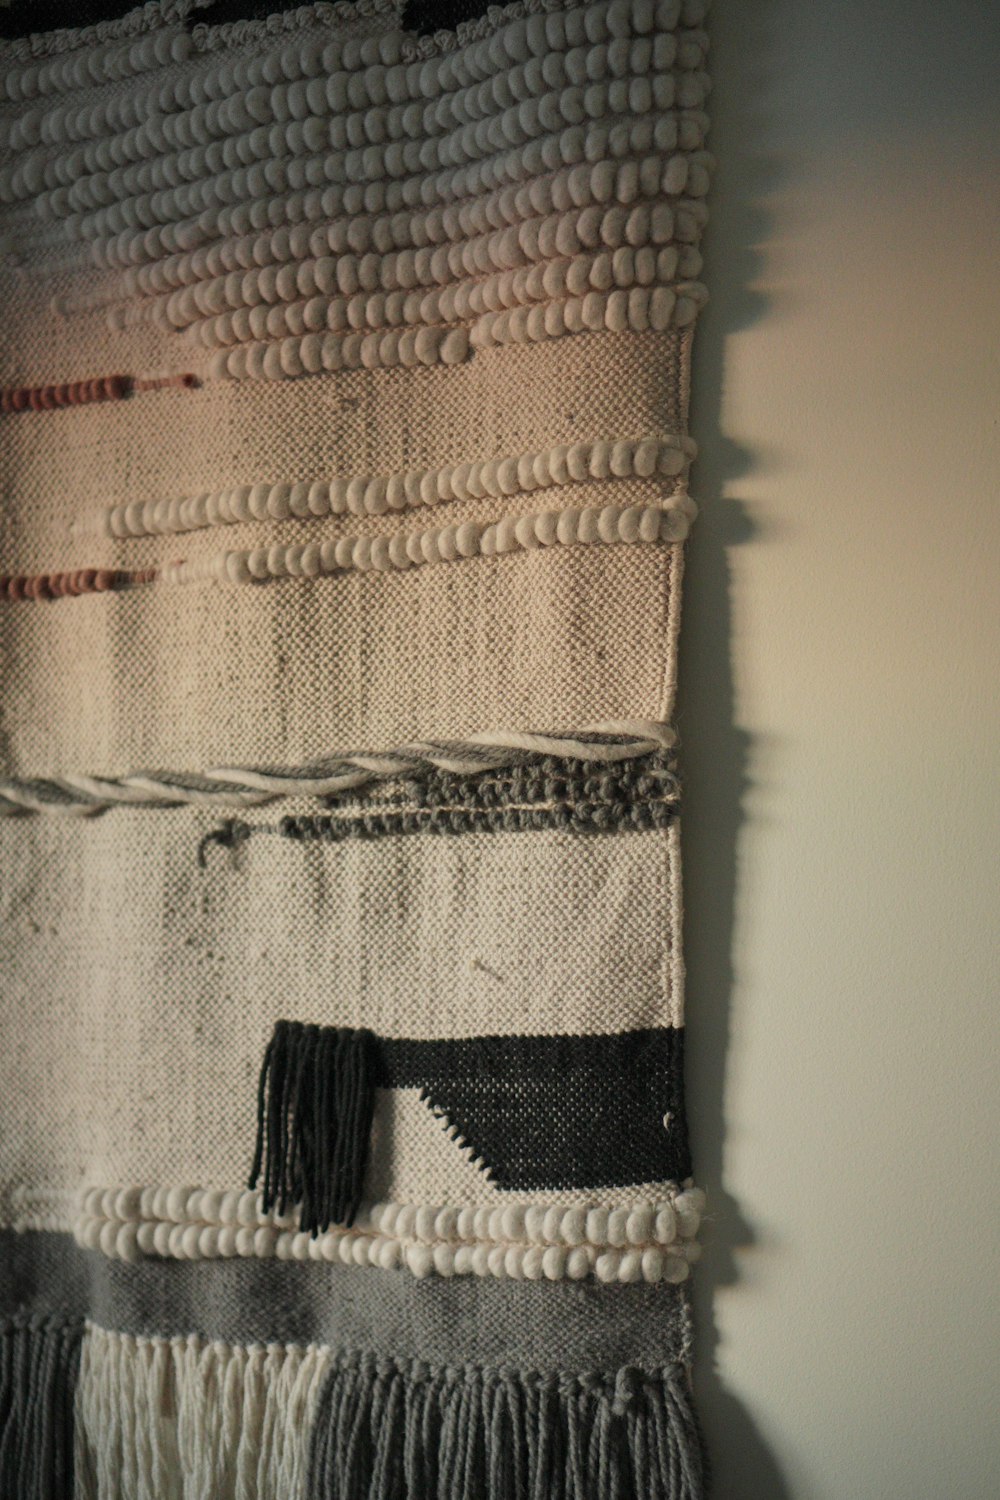 a close up of a woven wall hanging